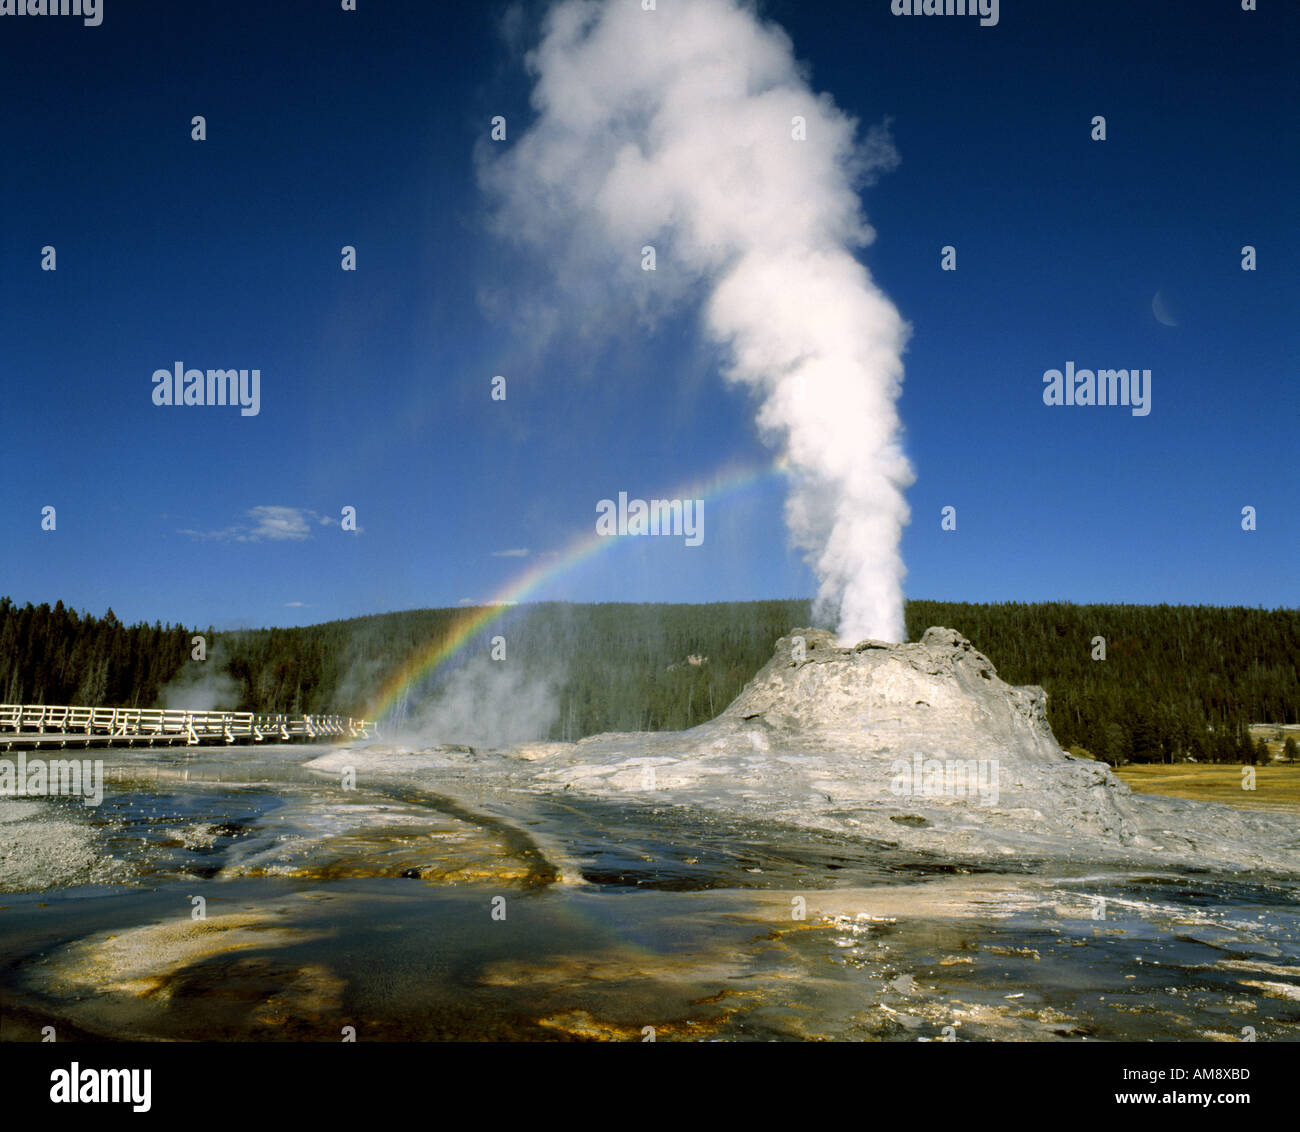 USA - WYOMING : Castle Geyser Yellowstone National Park Banque D'Images